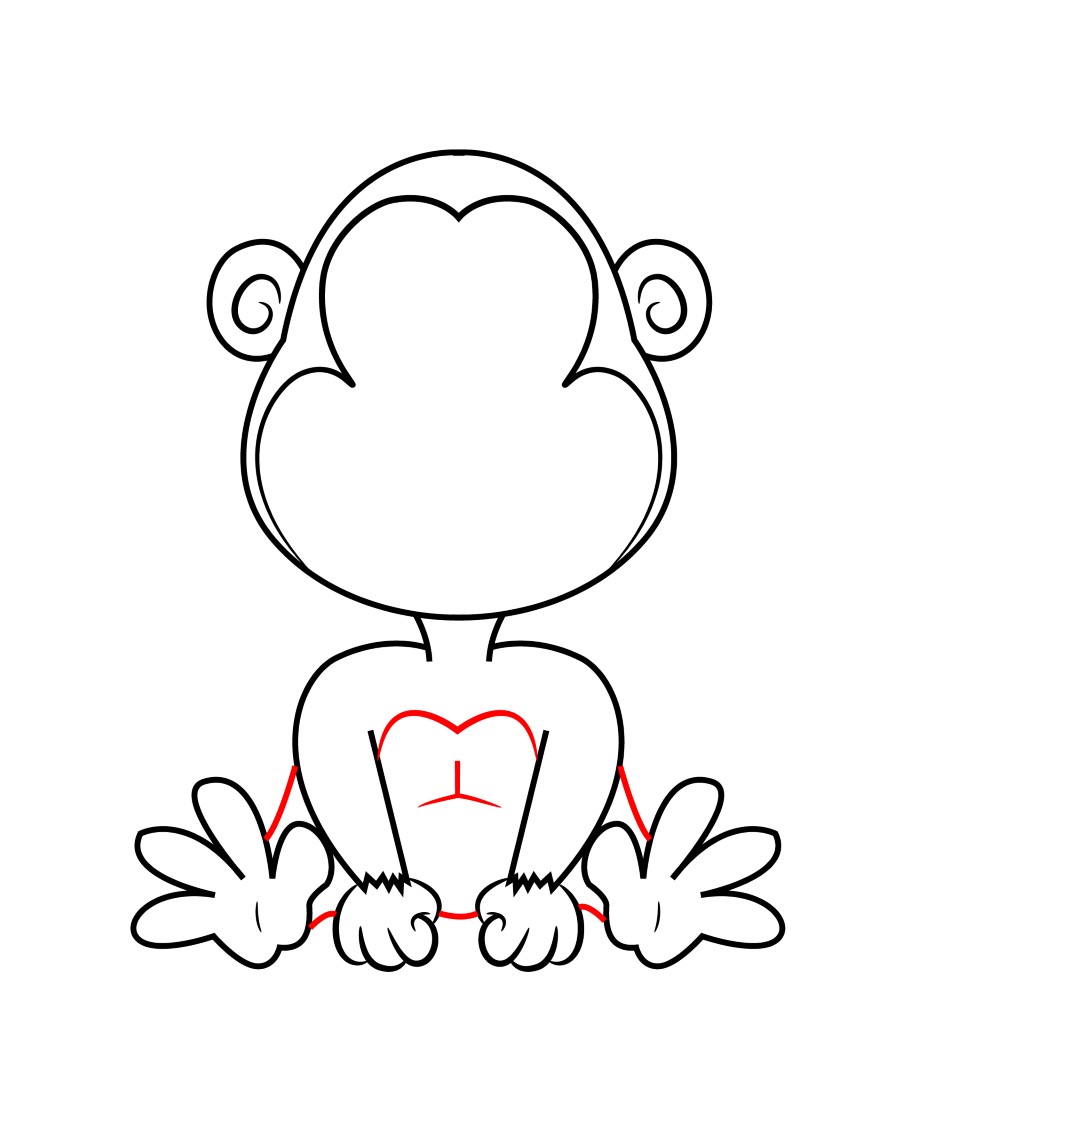 Cartoon Monkey Body Images & Pictures - Becuo